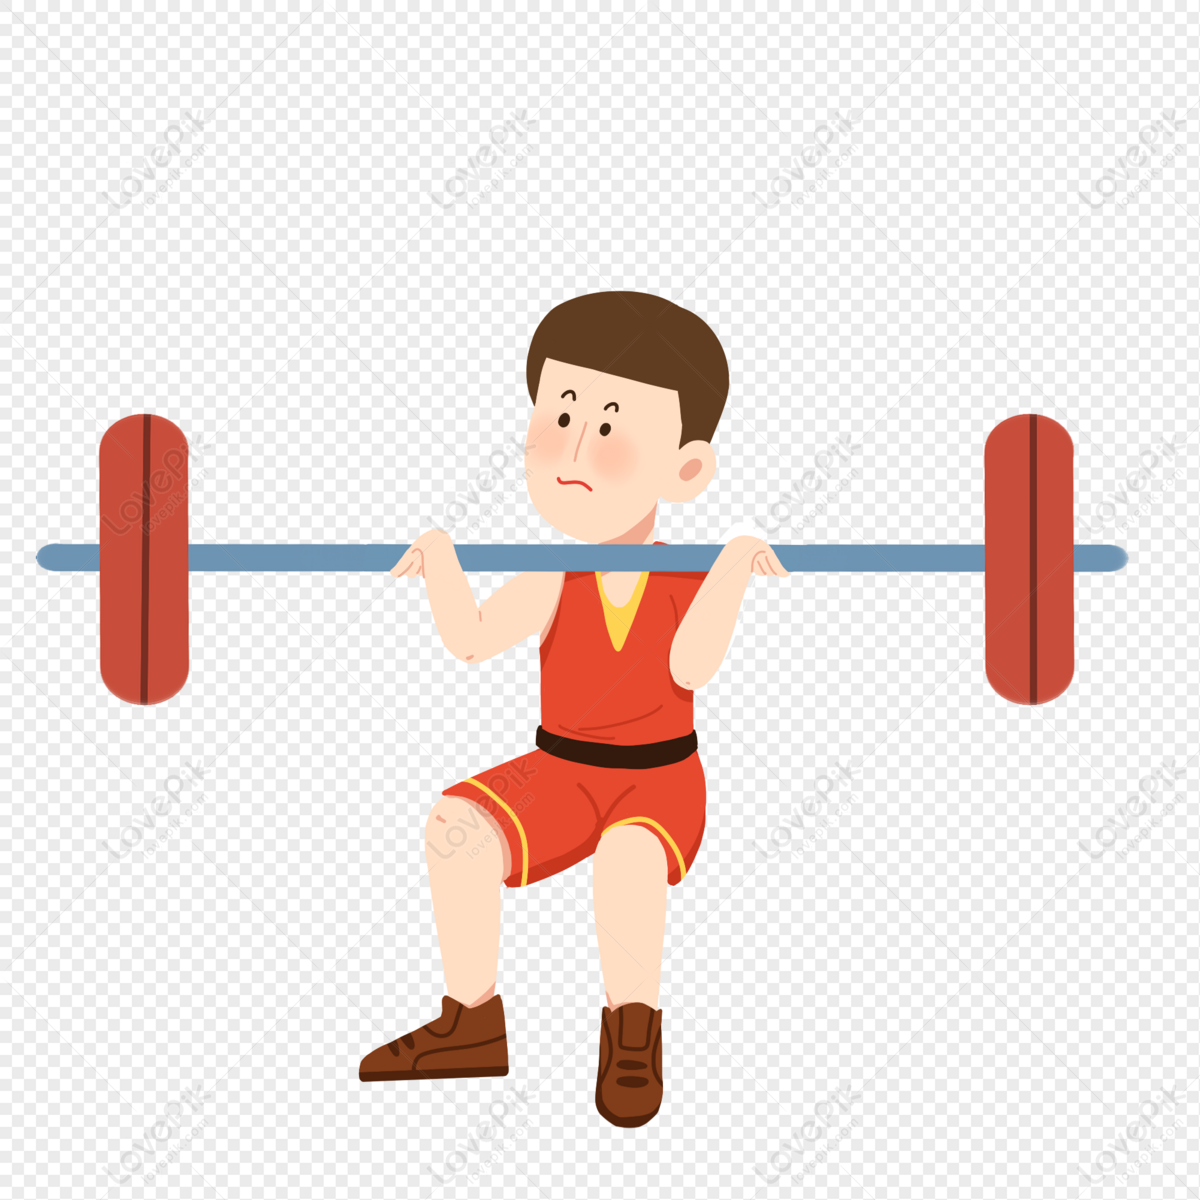 Weightlifting Cartoon PNG Transparent Image And Clipart Image For Free  Download - Lovepik | 401351277